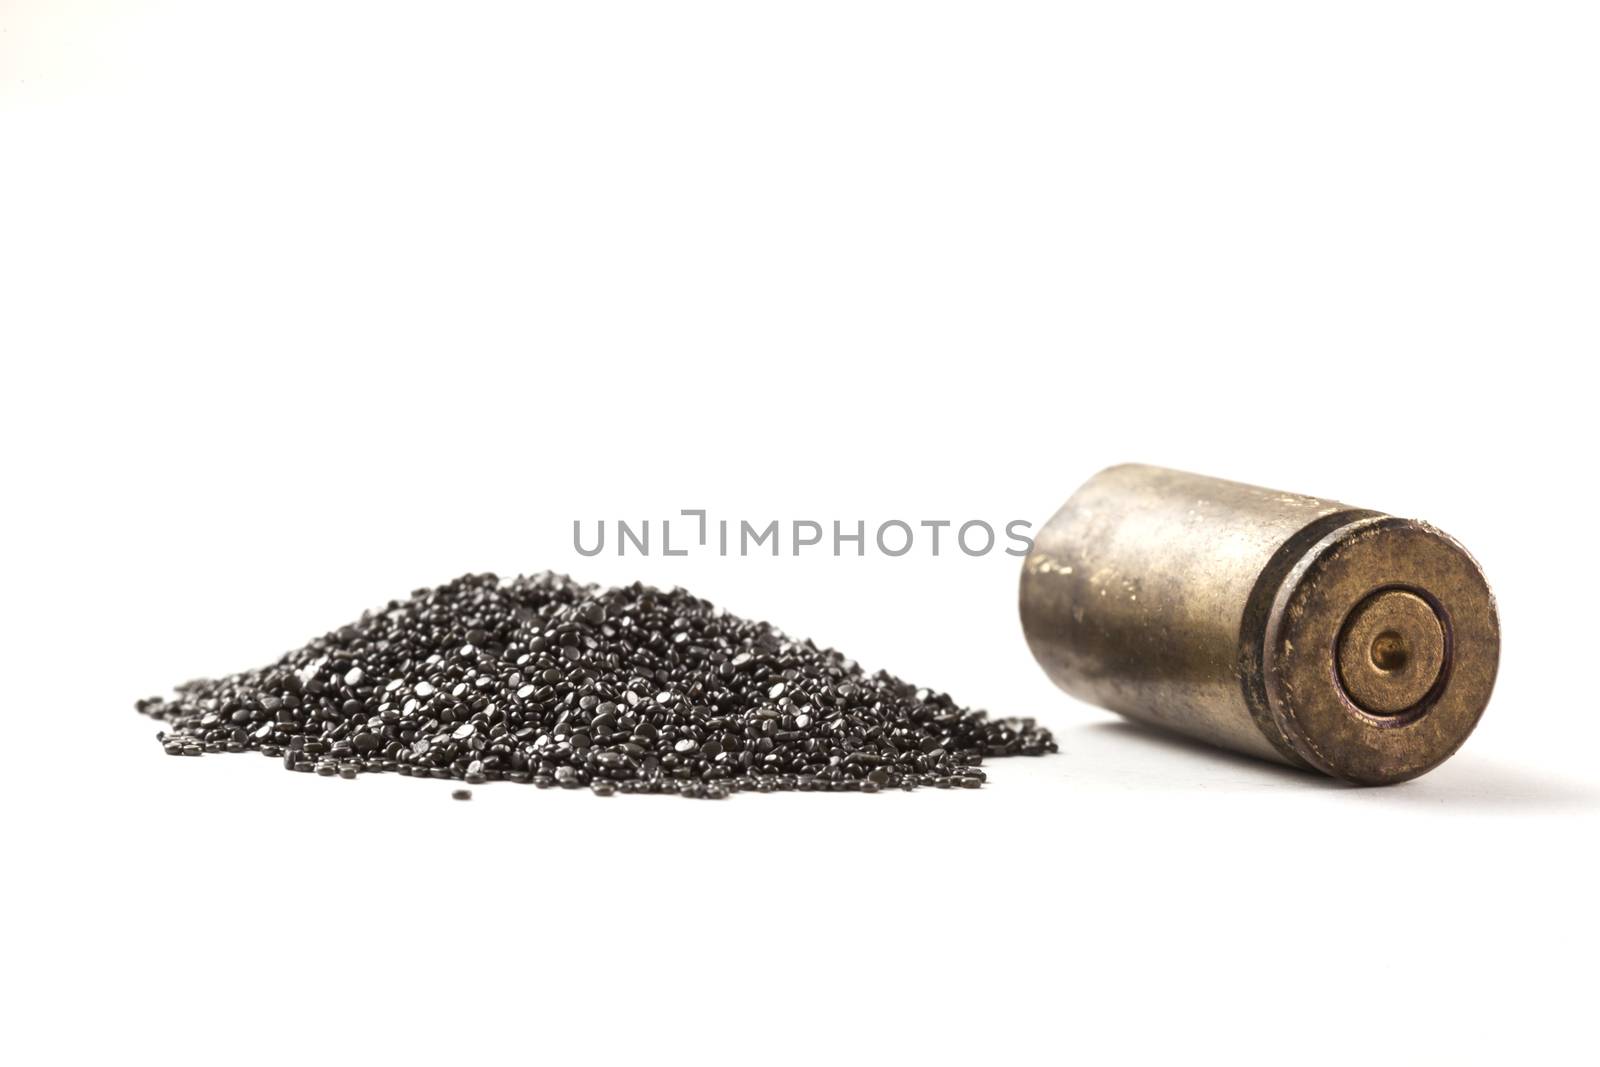 Shell and Gunpowder by orcearo